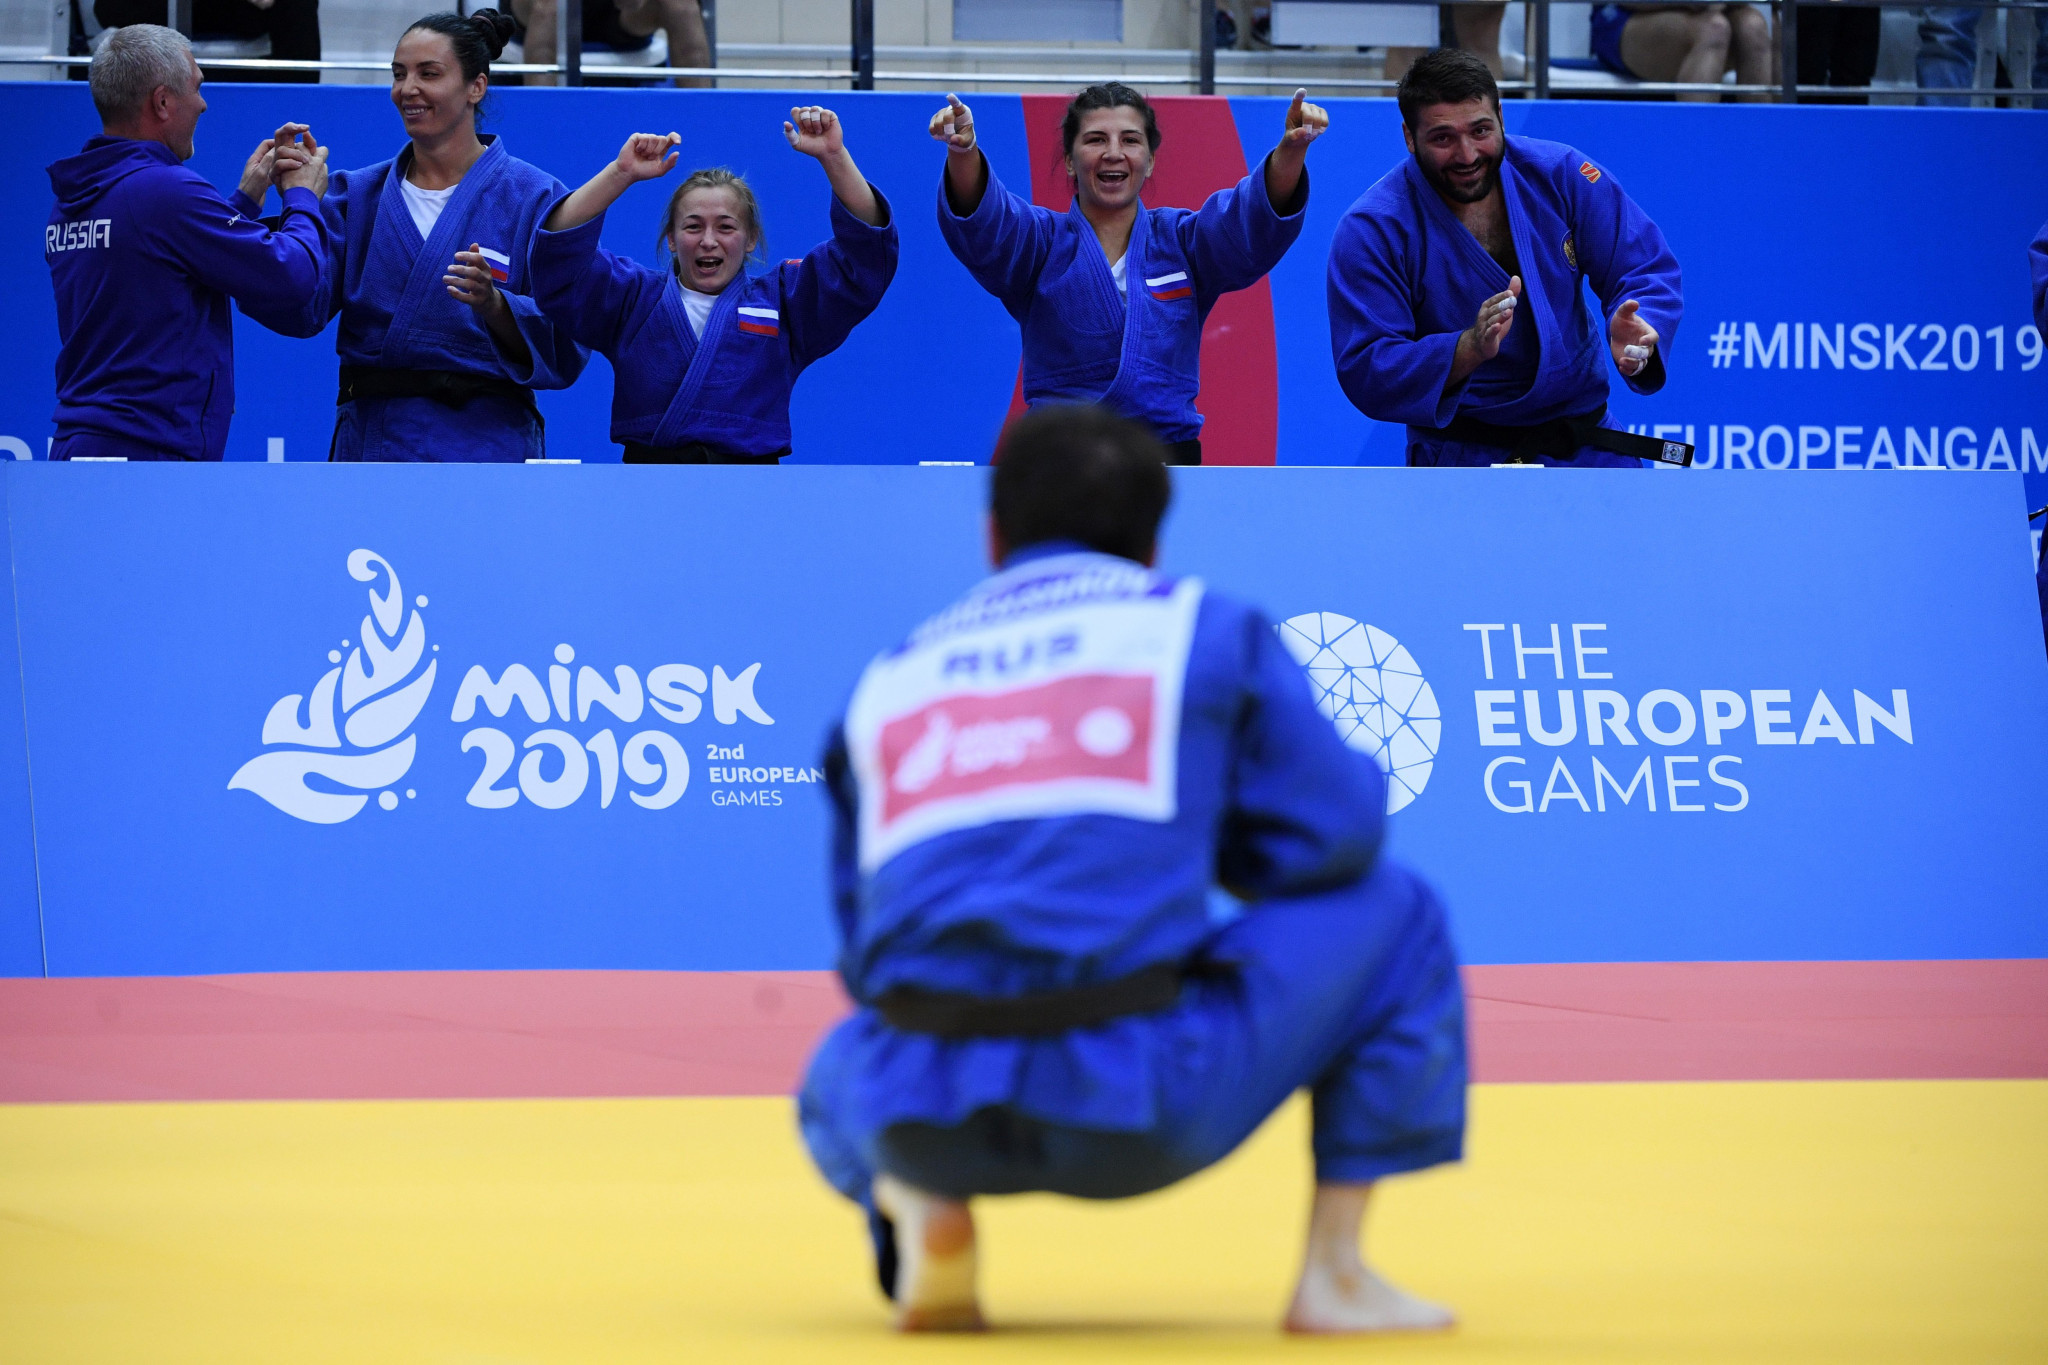 Mogushkov’s golden score heroics complete dramatic judo mixed team victory for Russia at Minsk 2019